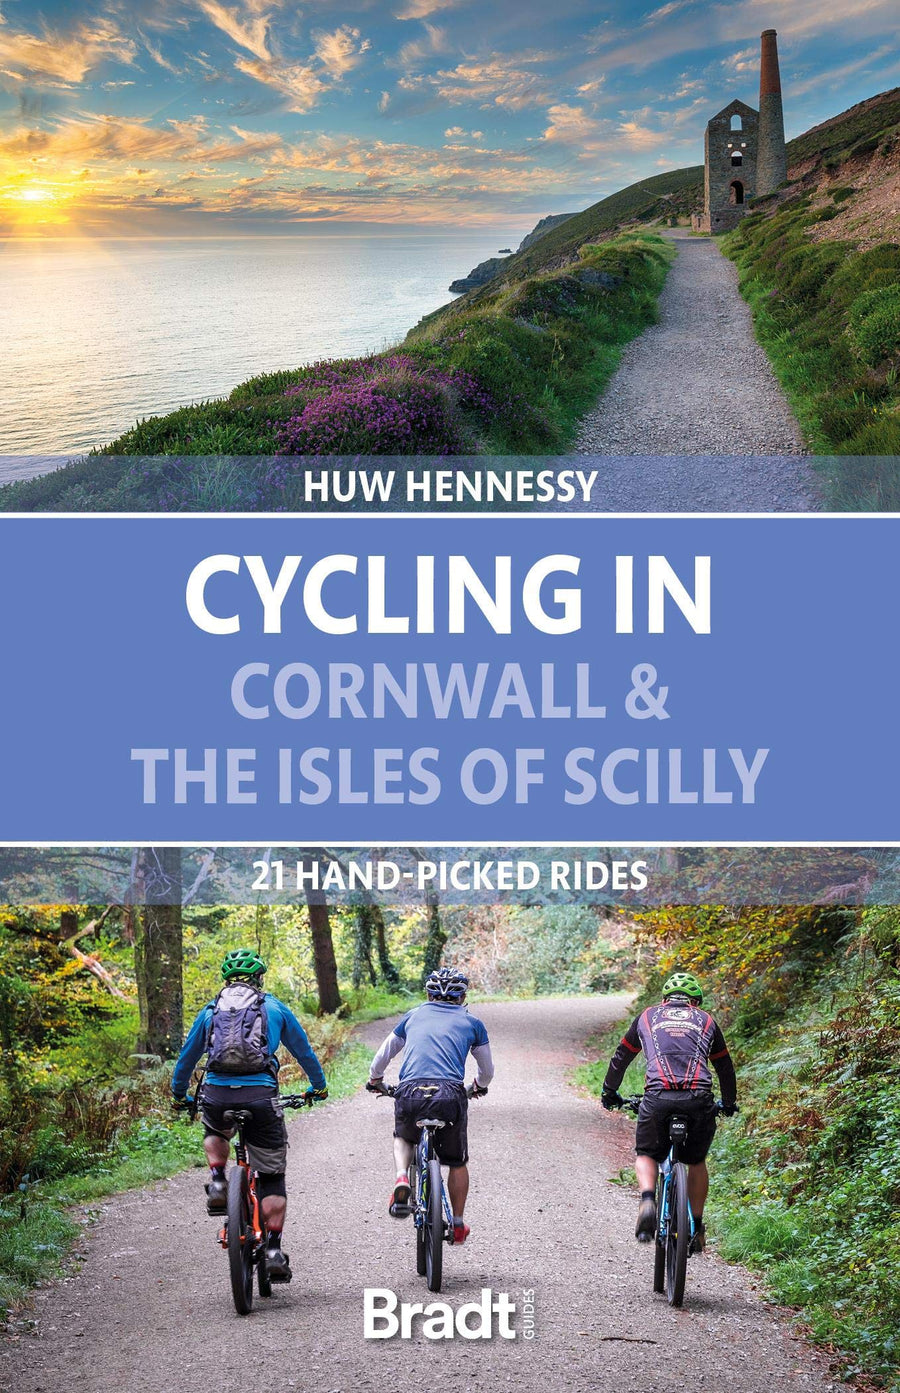 Guide cycliste (en anglais) - Cycling in Cornwall & the Isles of Scilly - Édition 2021 | Bradt guide de voyage Bradt 